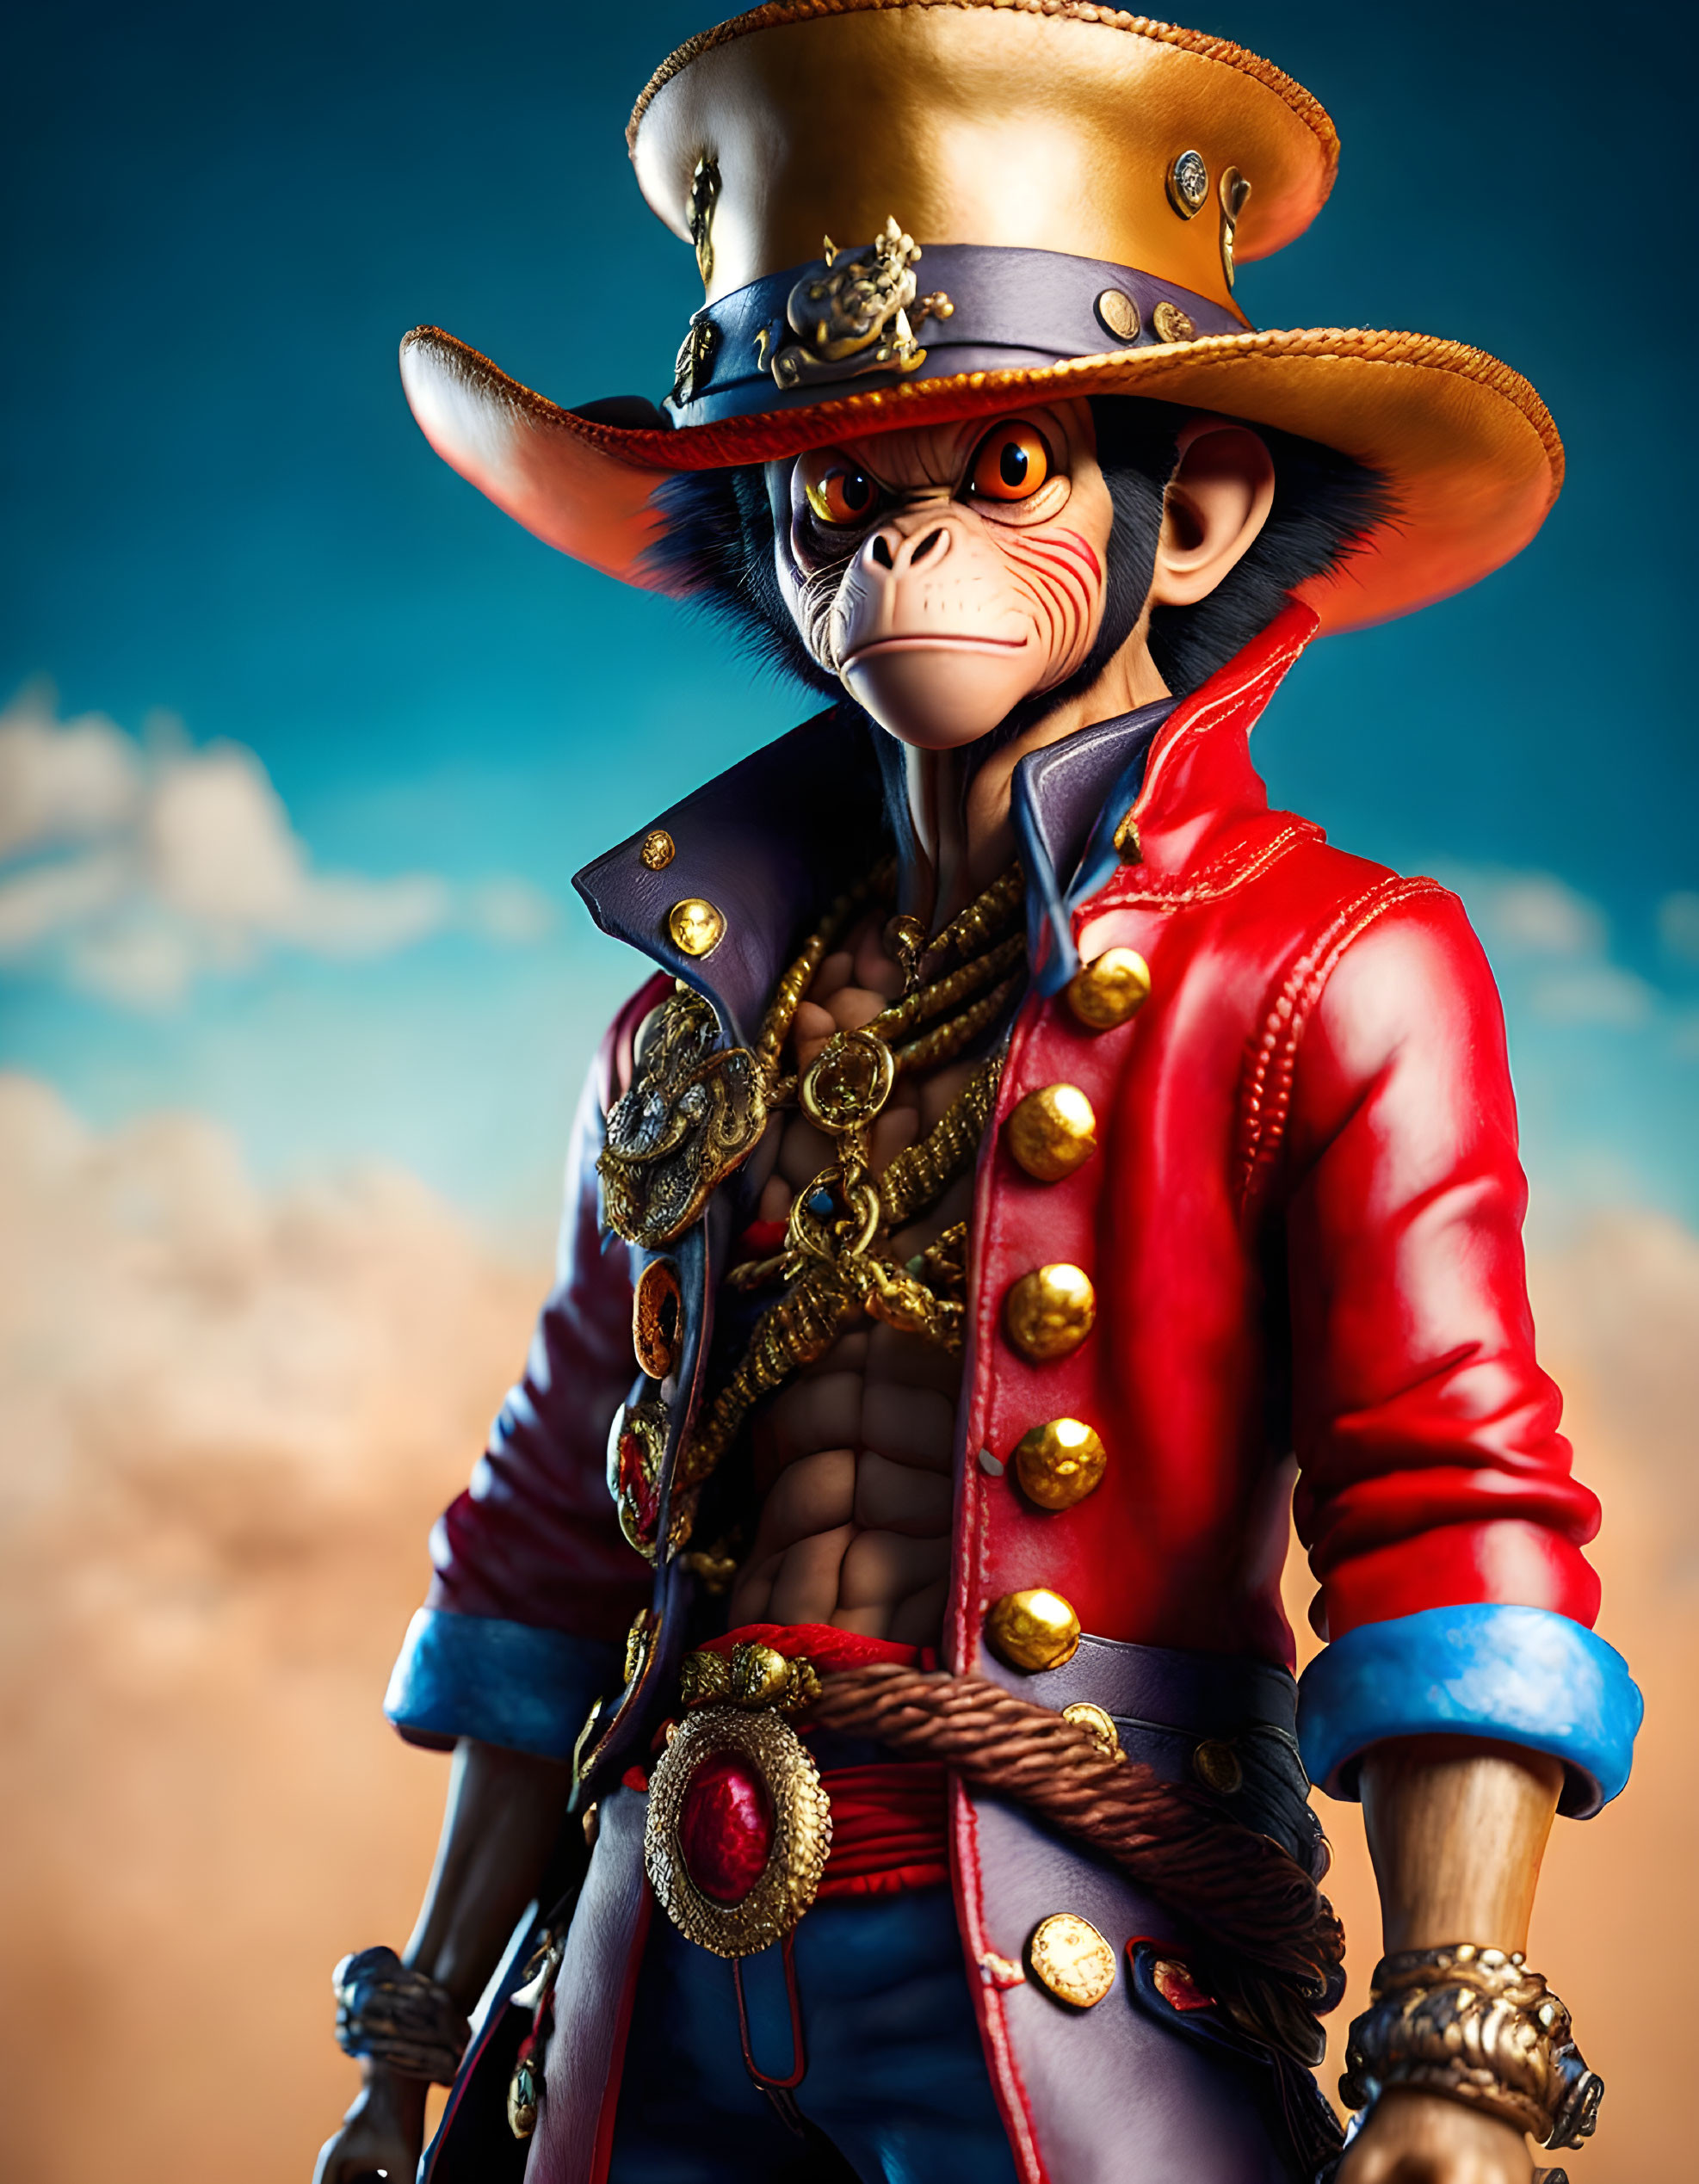 Pirate monkey D. Luffy, from cartoon One Piece